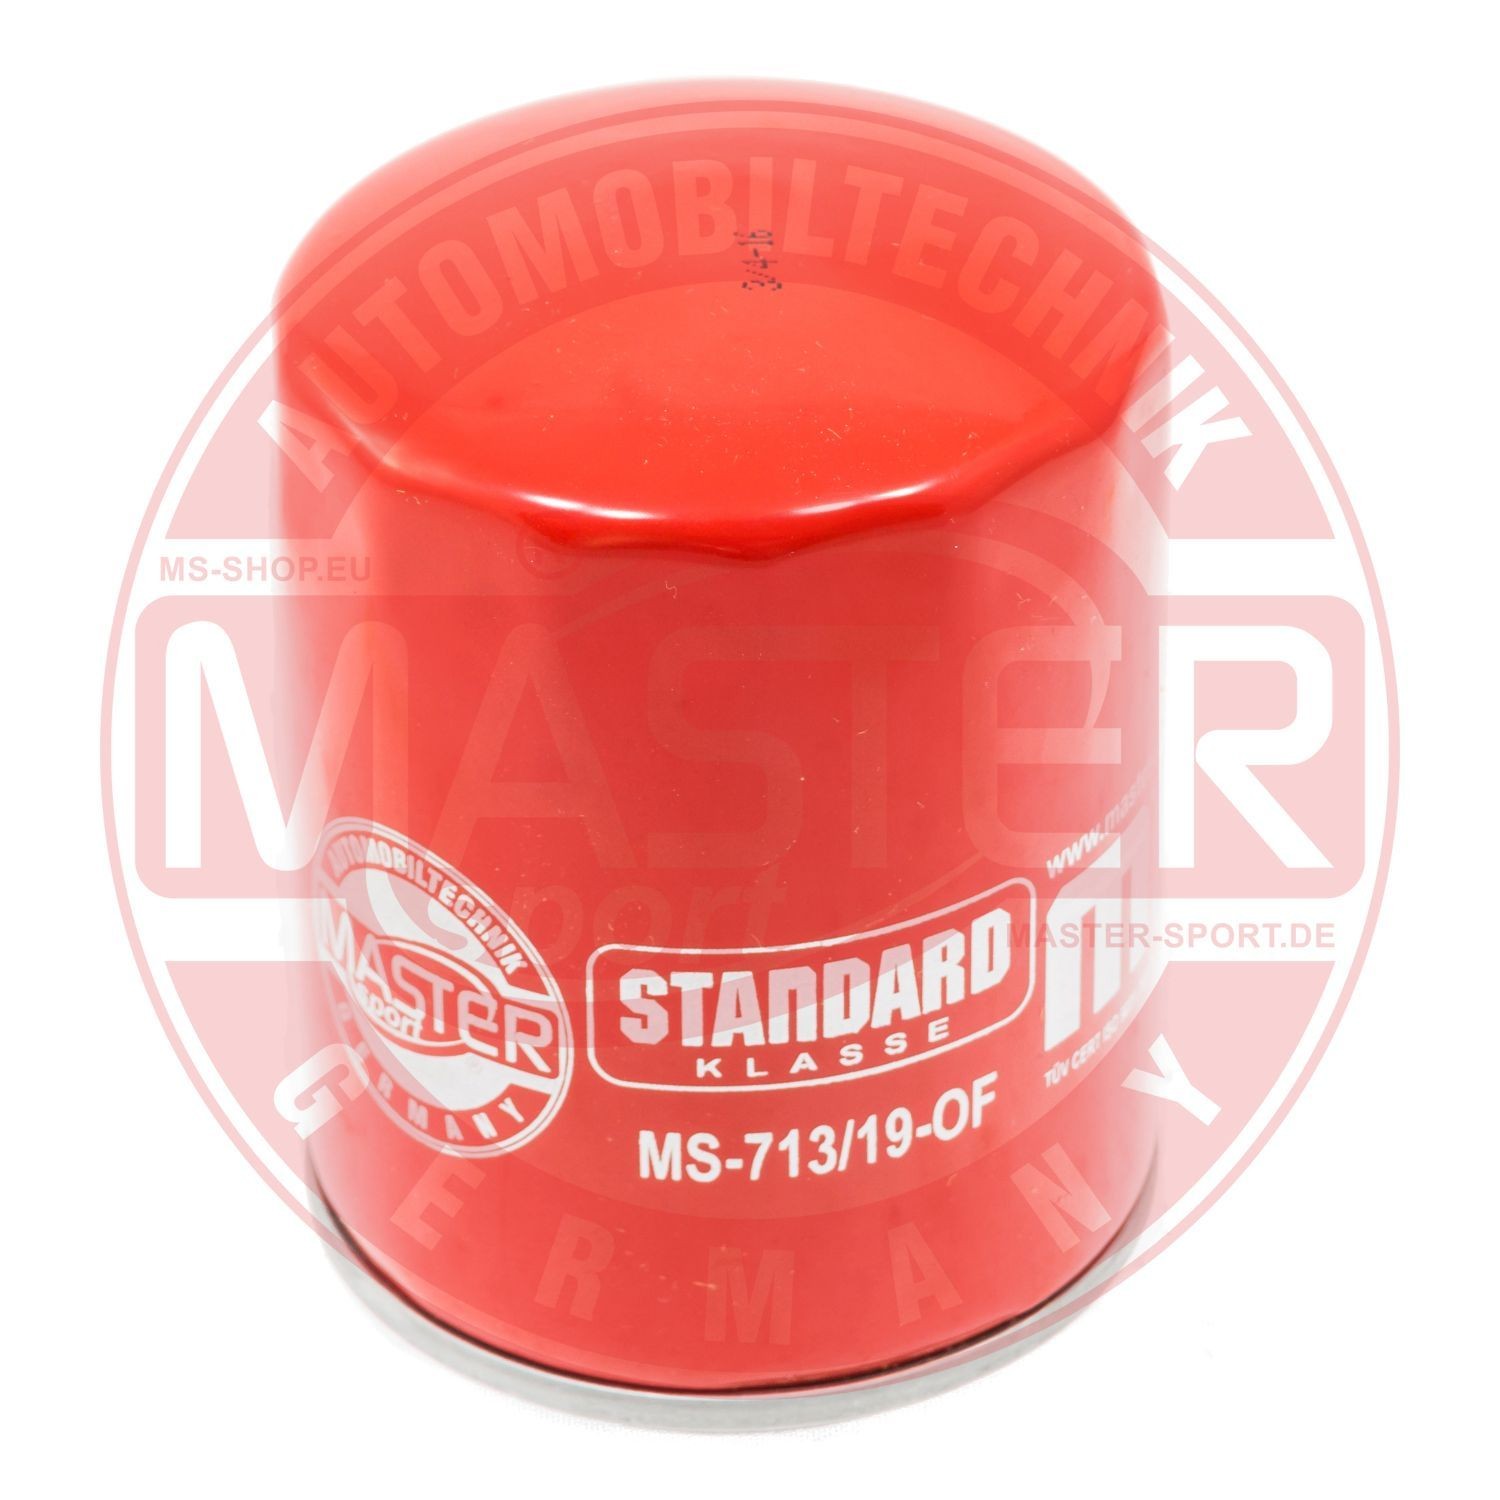 713/19-OF-PCS-MS Oil filter HD440713190 MASTER-SPORT 3/4-16 UNF, with one anti-return valve, Filter Insert